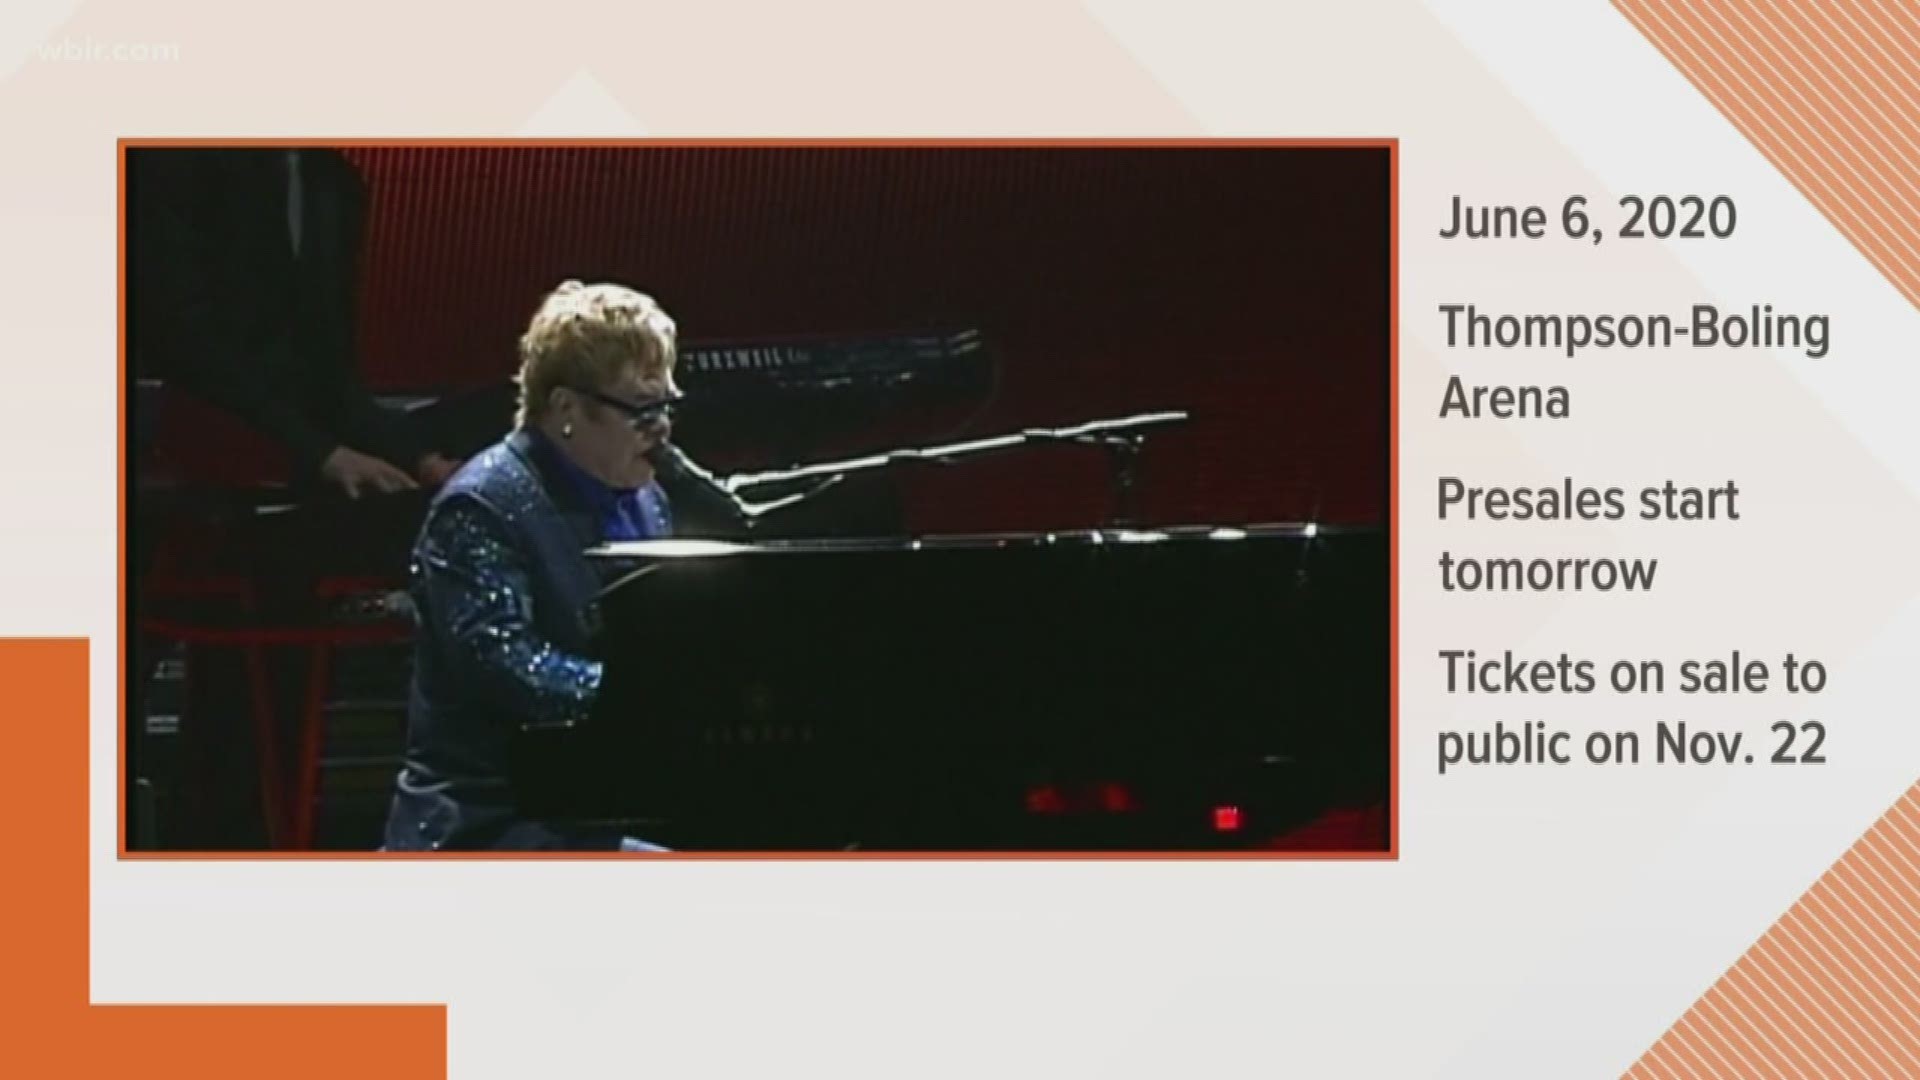 Elton John will perform at Thompson-Boling Arena as part of his "Farewell Yellow Brick Road" world tour.